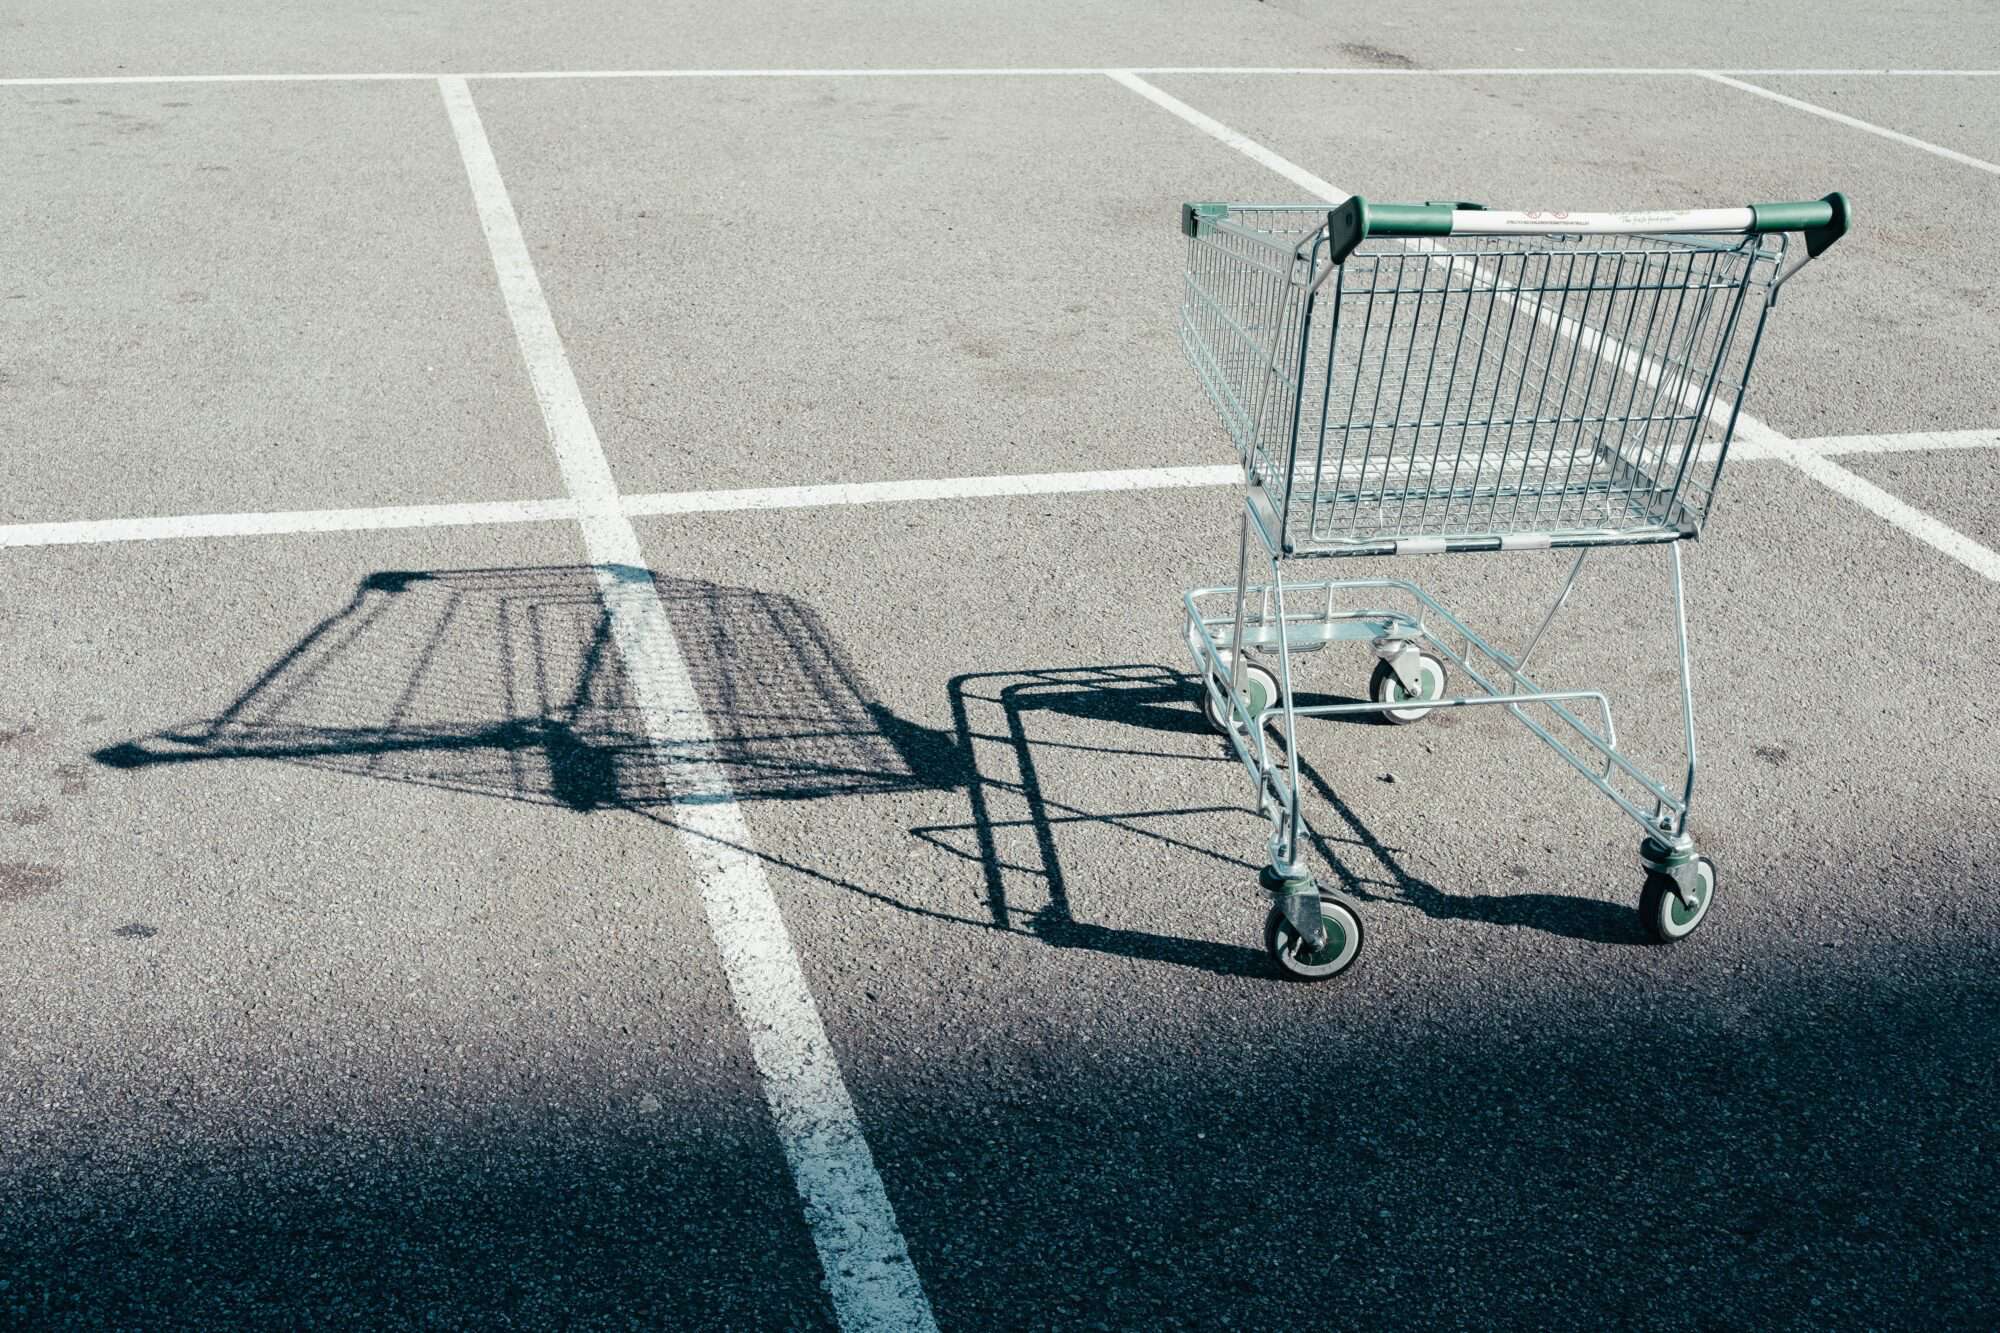 An empty shopping cart sits empty and alone in a parking lot.